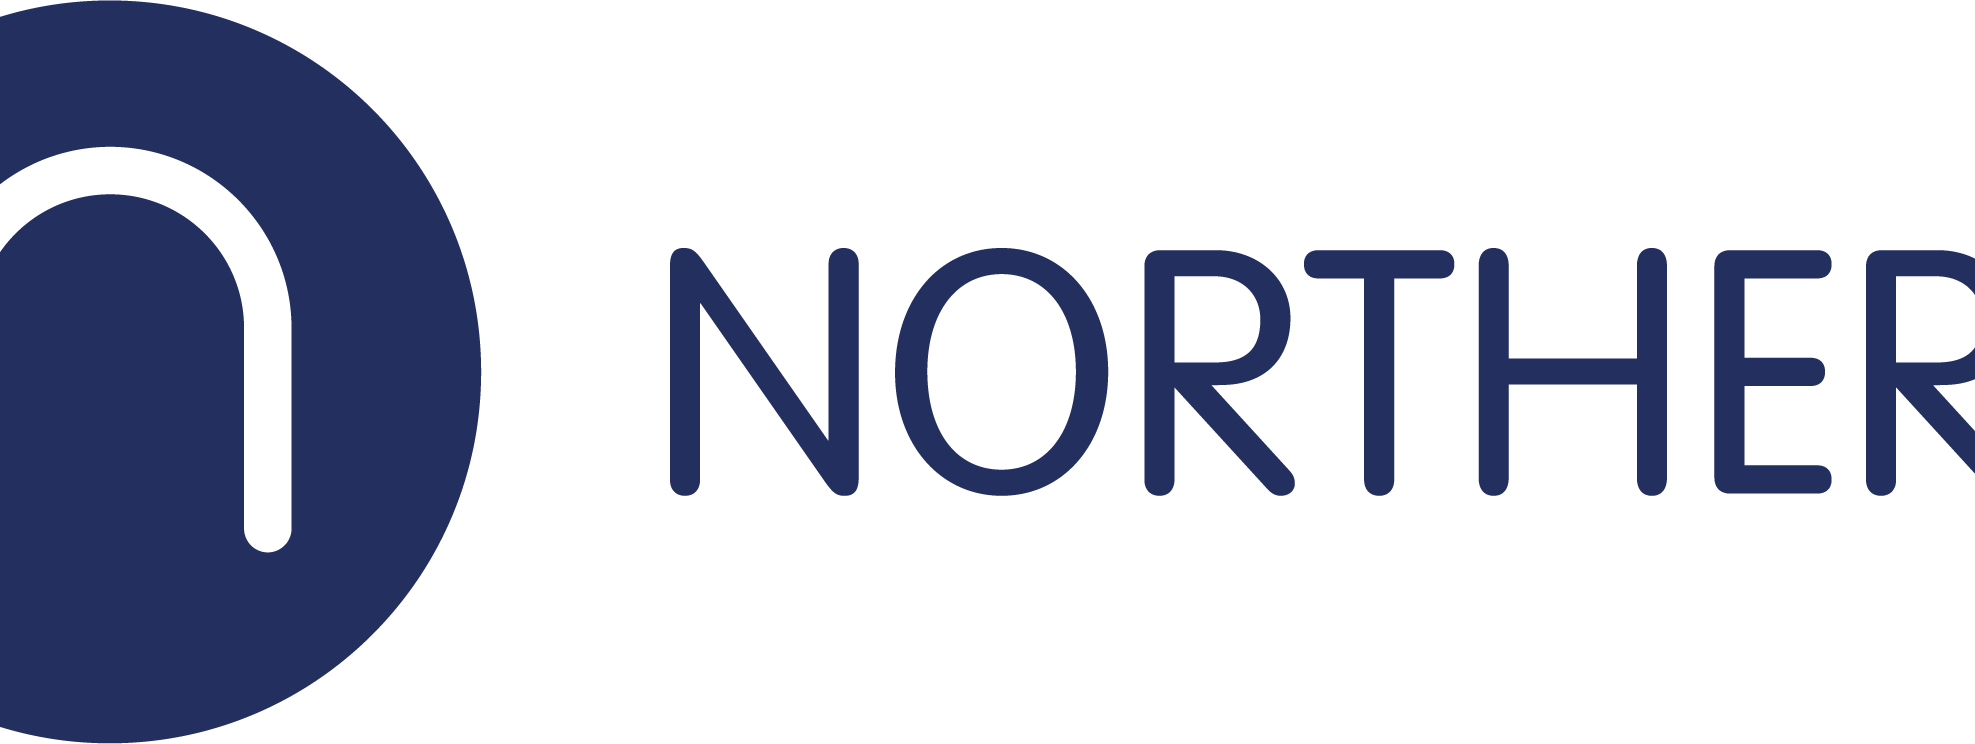 the northern trains logo